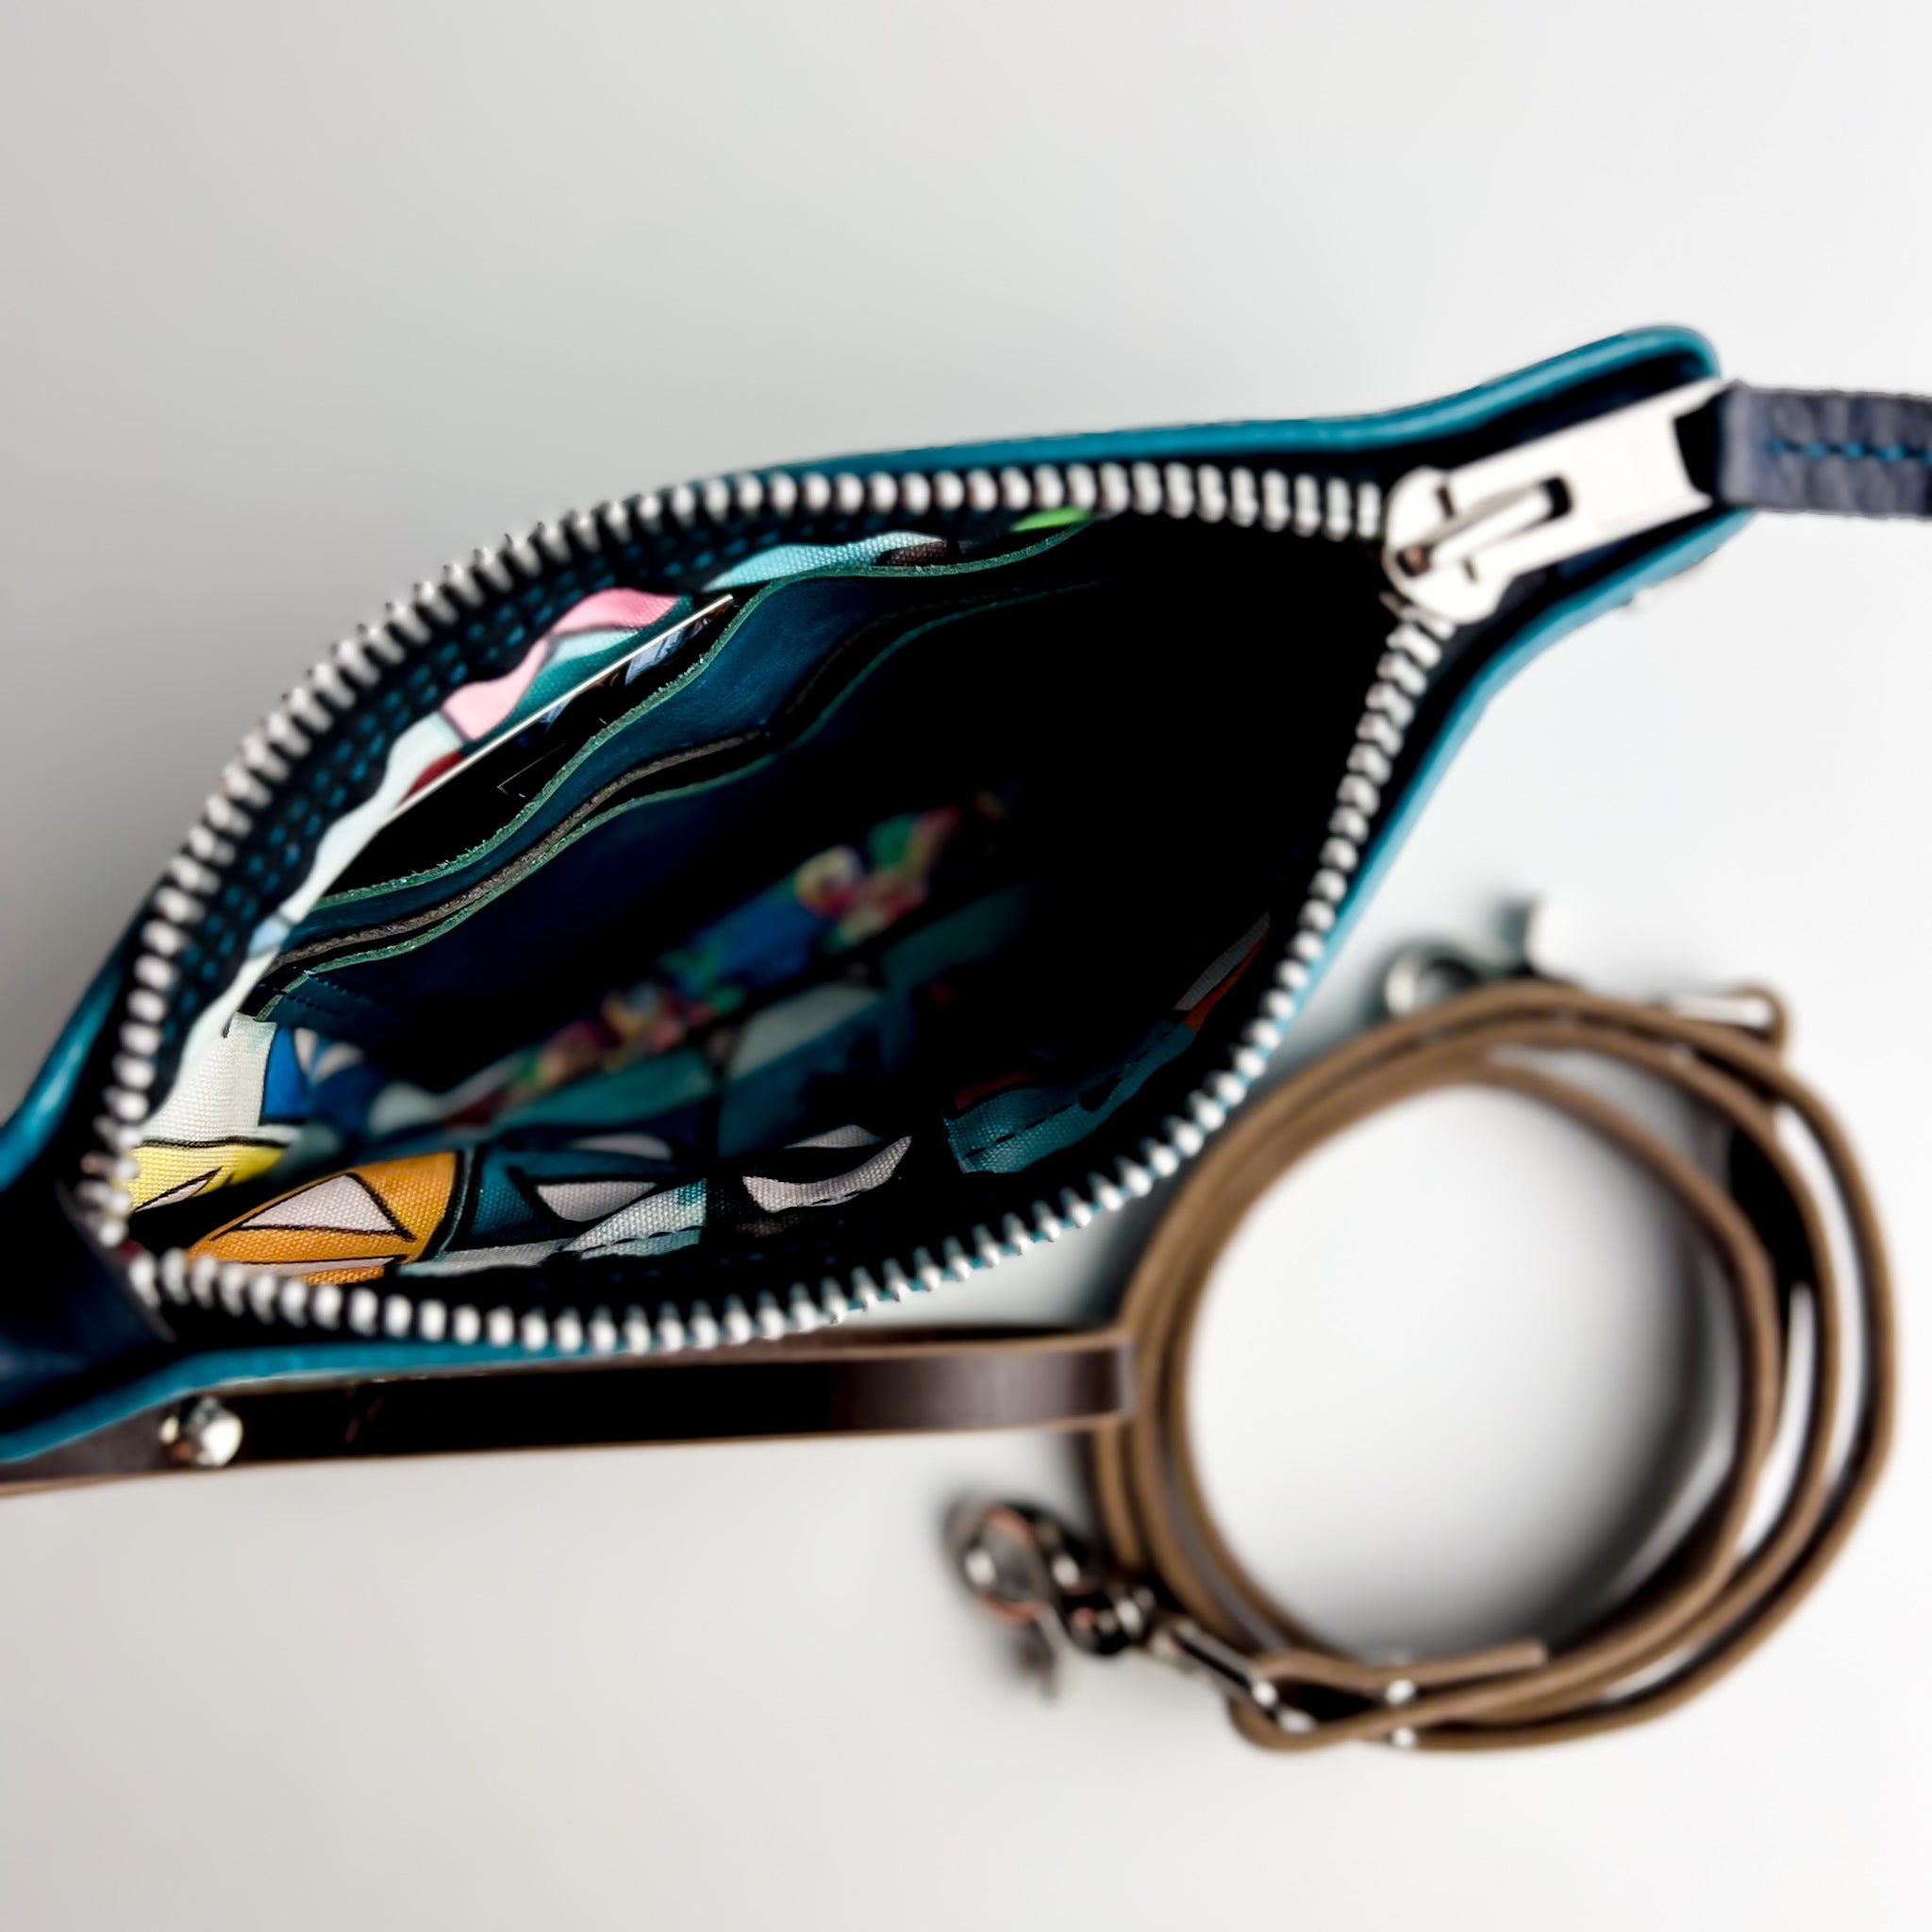 Practically Perfect Collection | Belt Bag Clutch + Crossbody | Turquoise